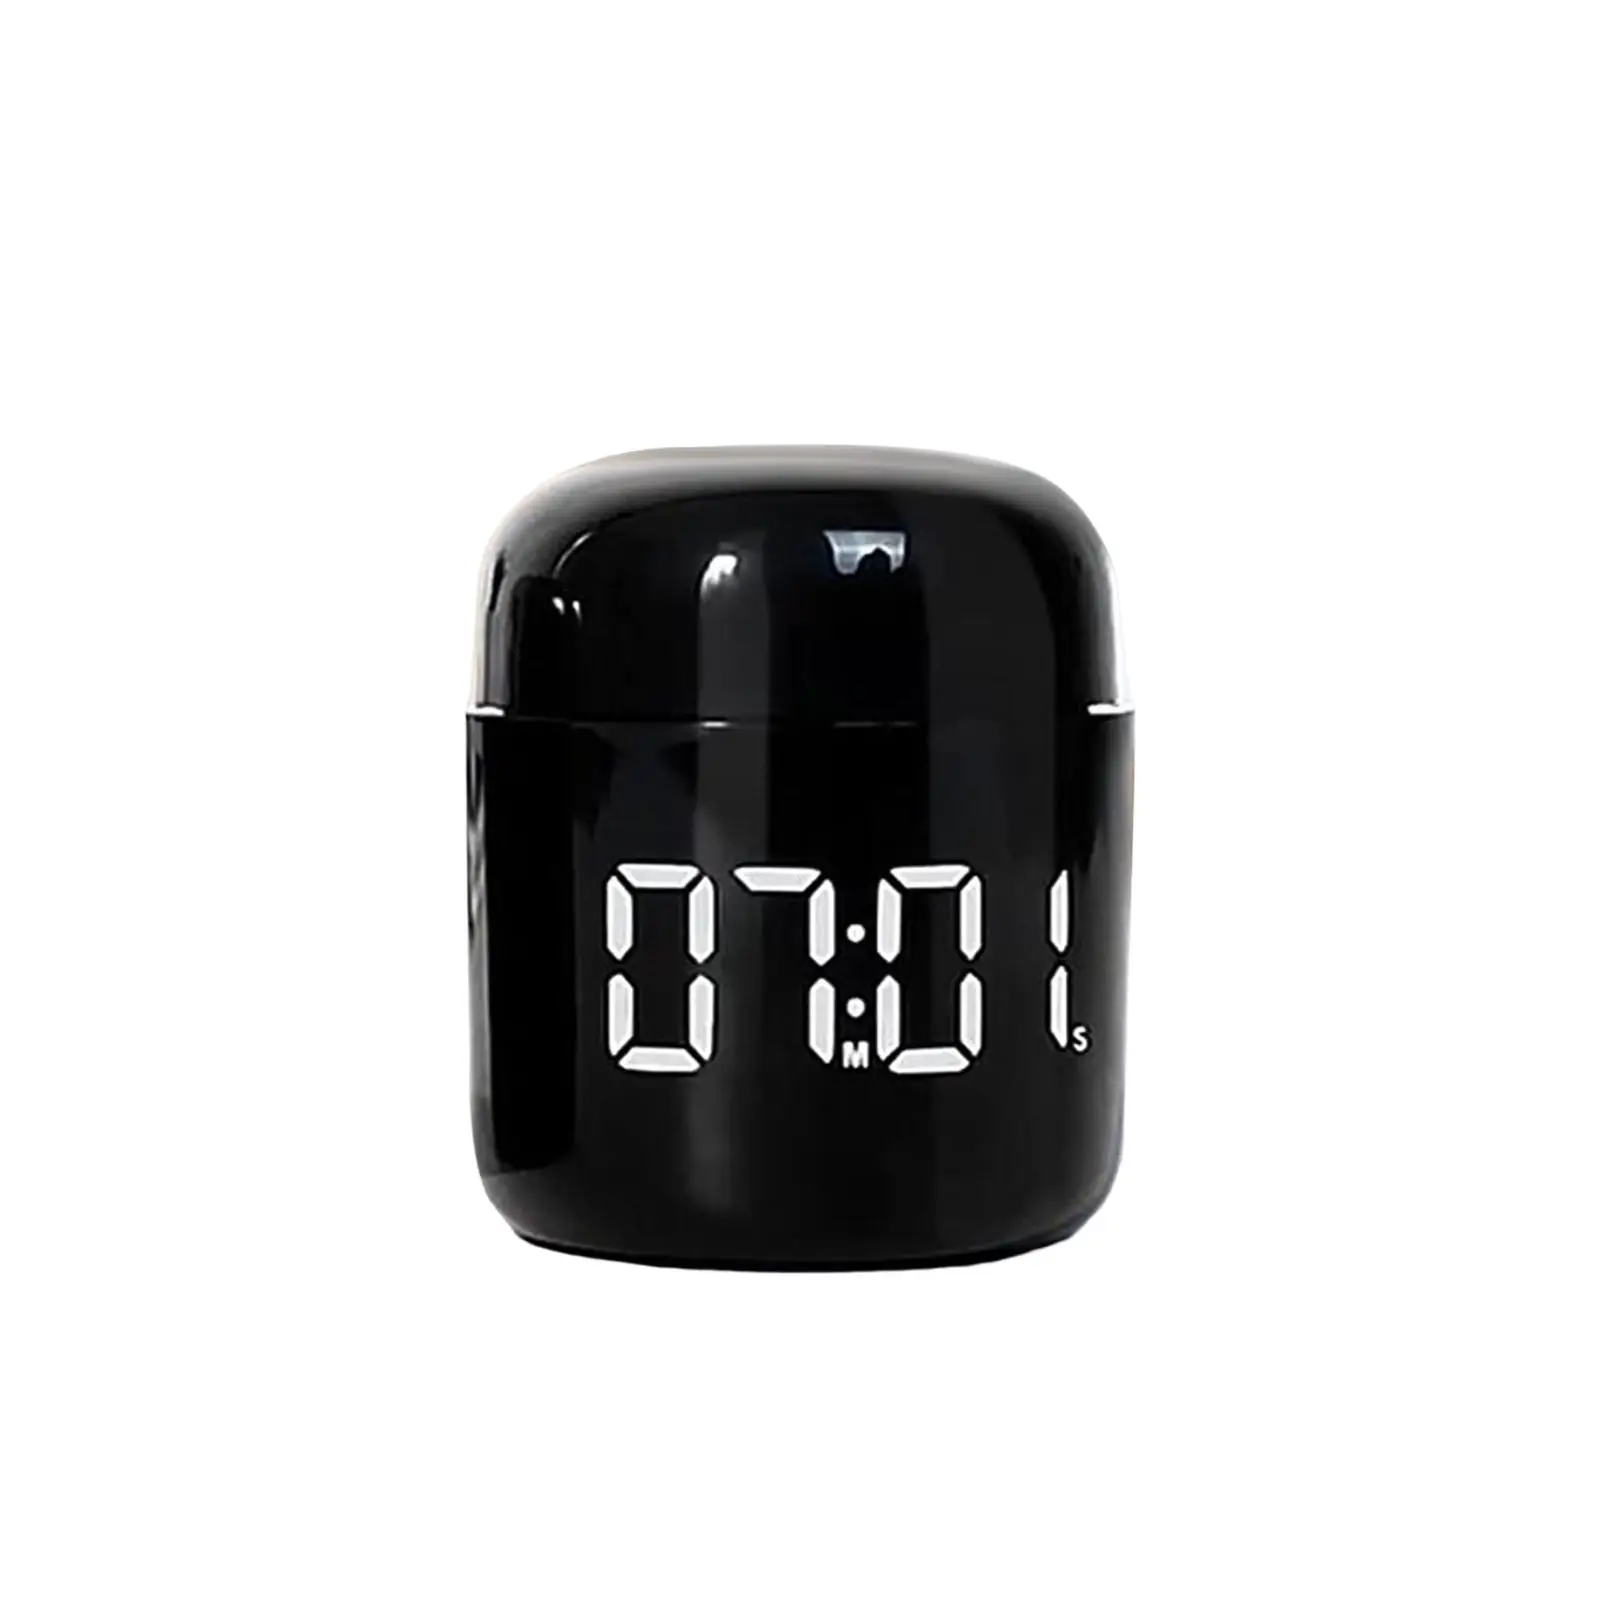 

Round Digital Kitchen Timer Countdown Alarm Clock LED Display Cosmetic Bottles Shaped for Home Shower Students Teachers Kids